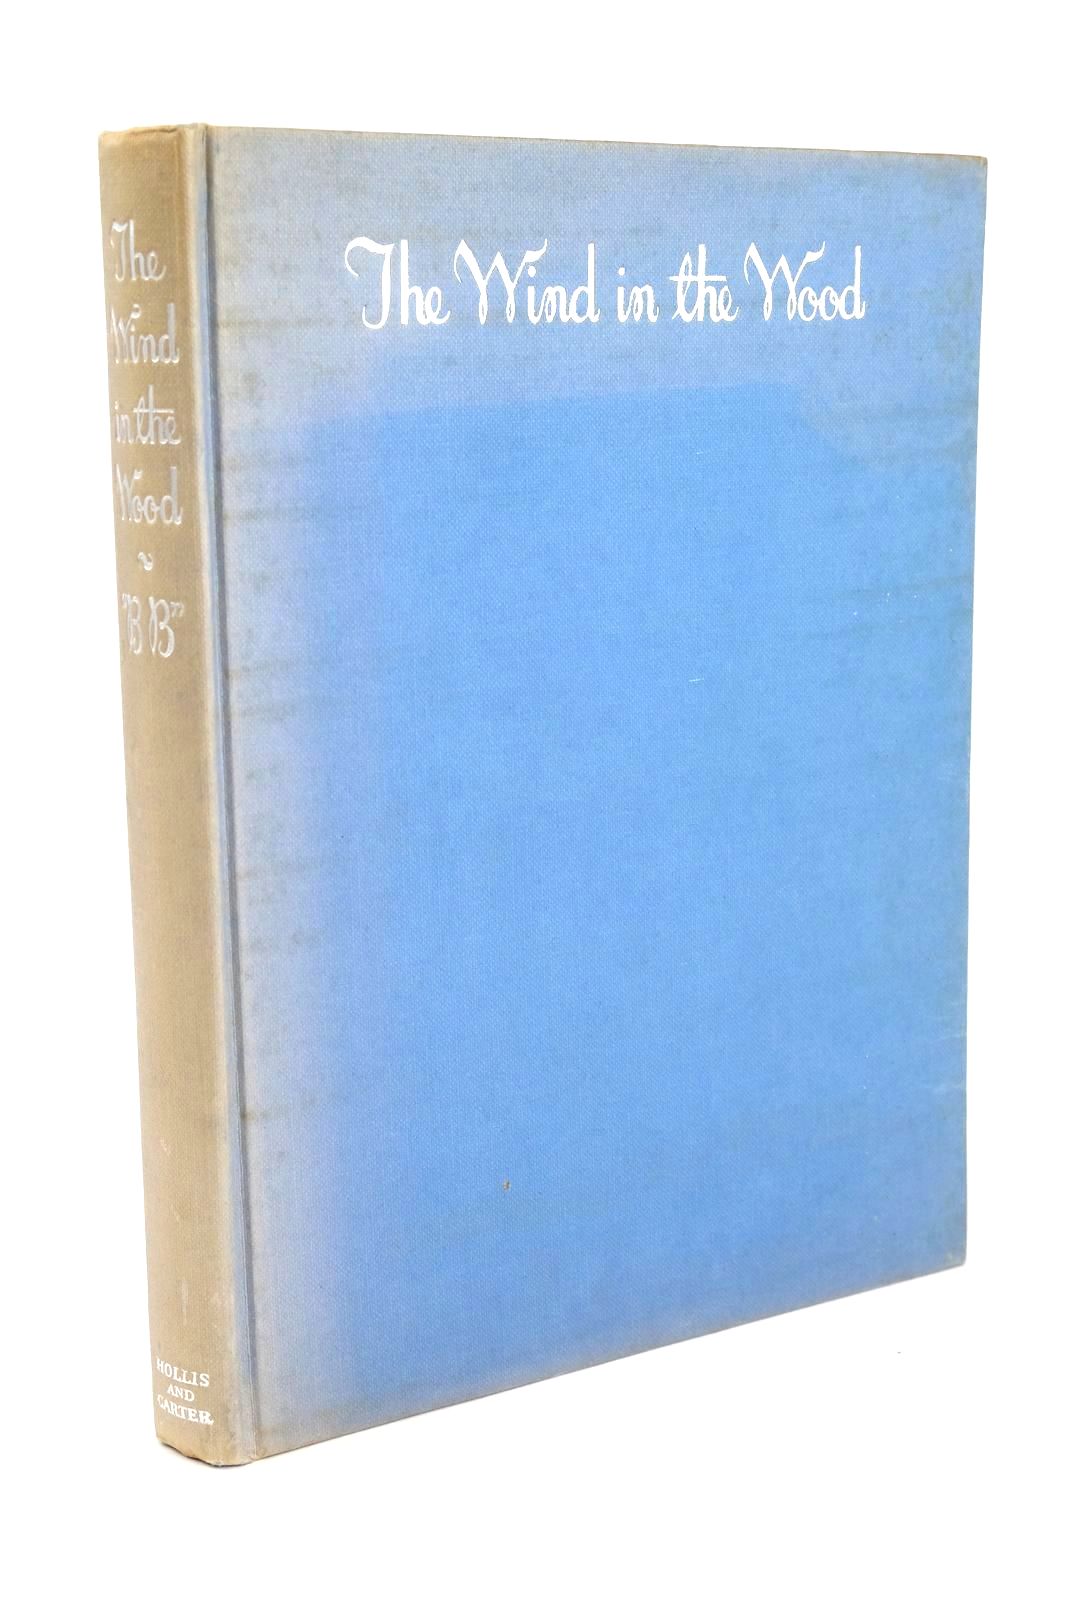 Photo of THE WIND IN THE WOOD written by BB,  illustrated by BB,  published by Hollis &amp; Carter (STOCK CODE: 1326011)  for sale by Stella & Rose's Books